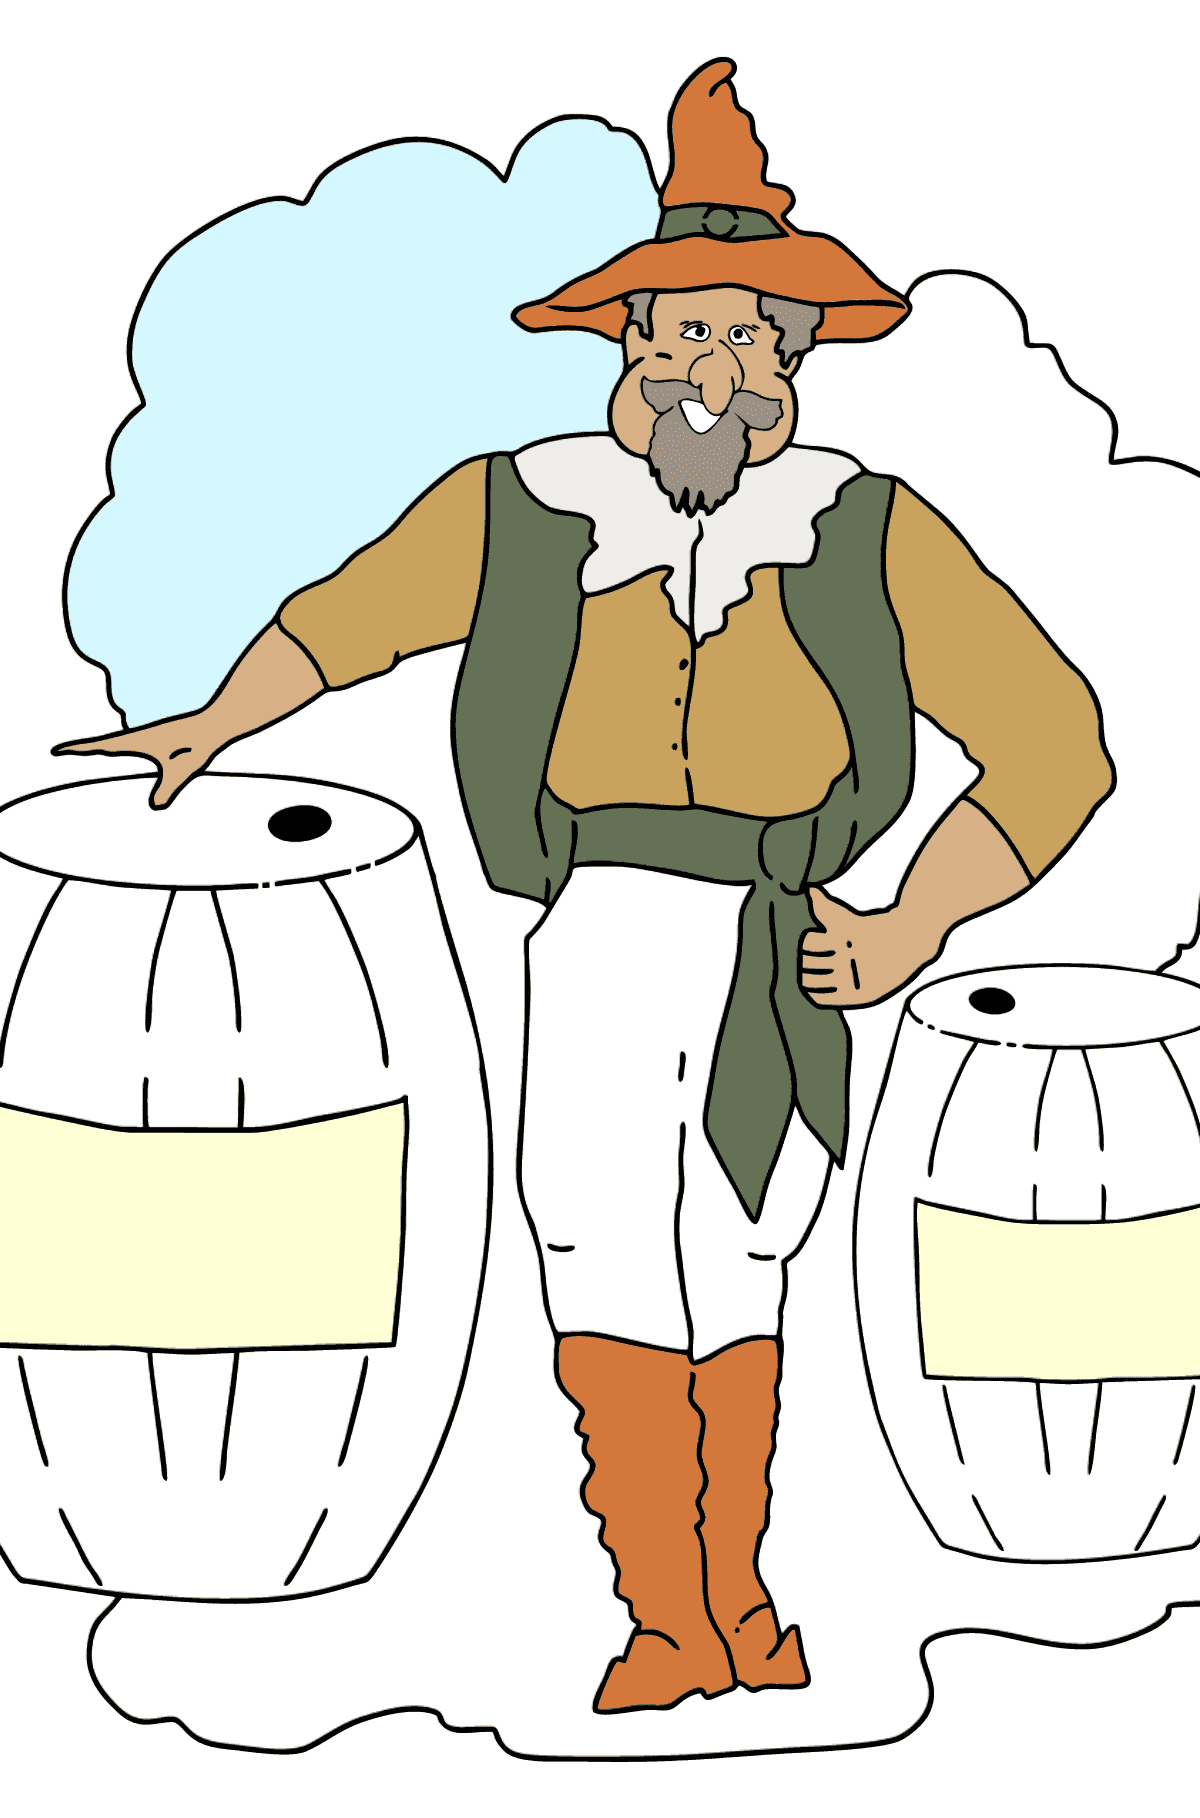 Coloring Page - A Pirate and Lemonade - Coloring Pages for Kids